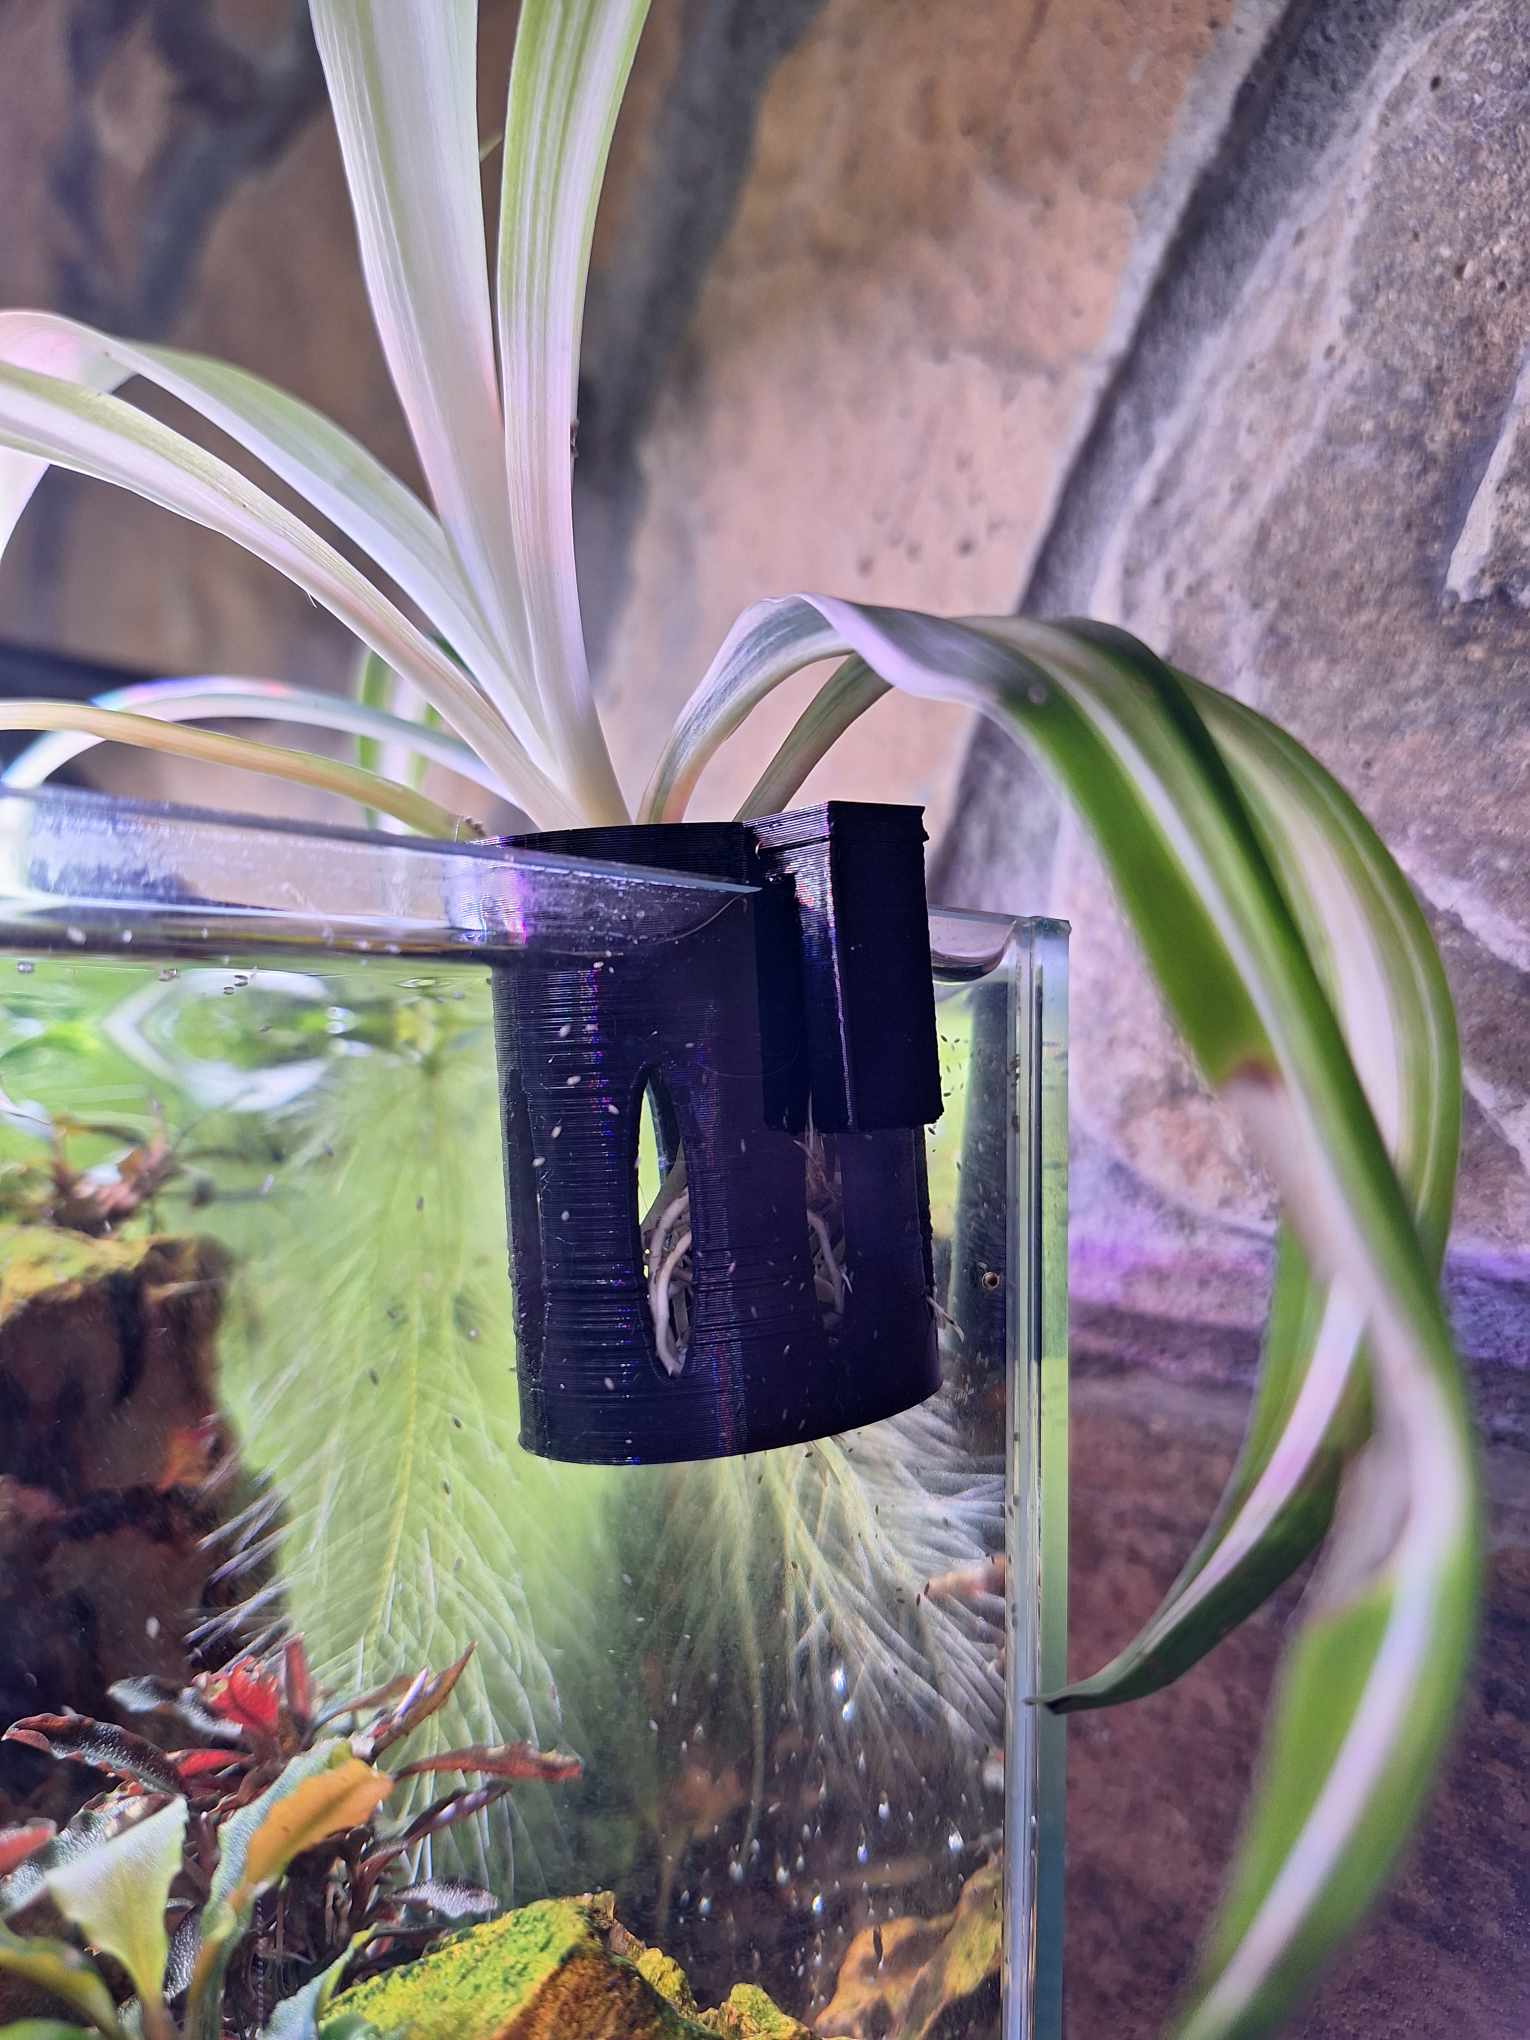 Hang-On Plant Buddy made of Overture black PETG attached to the side of an Aquatop 6-gallon bookshelf aquarium, supporting a healthy spider plant with roots submerged. In the background, dwarf water lettuce roots dangle in the water beside lush Bucephalandra Brownie 'Ghost' leaves.